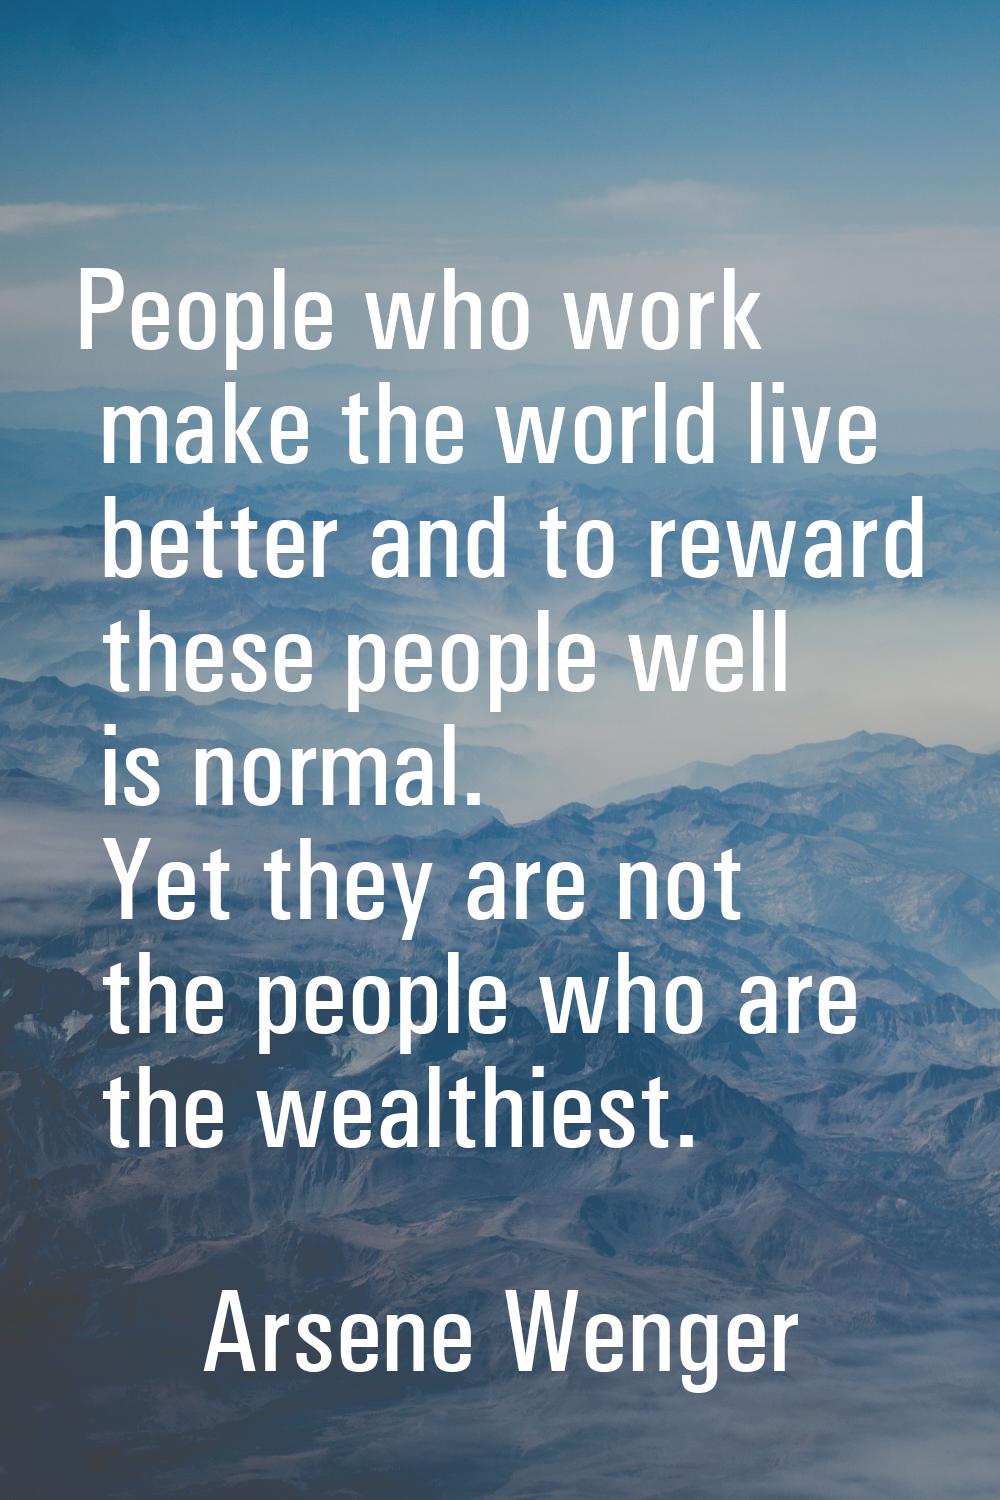 People who work make the world live better and to reward these people well is normal. Yet they are 